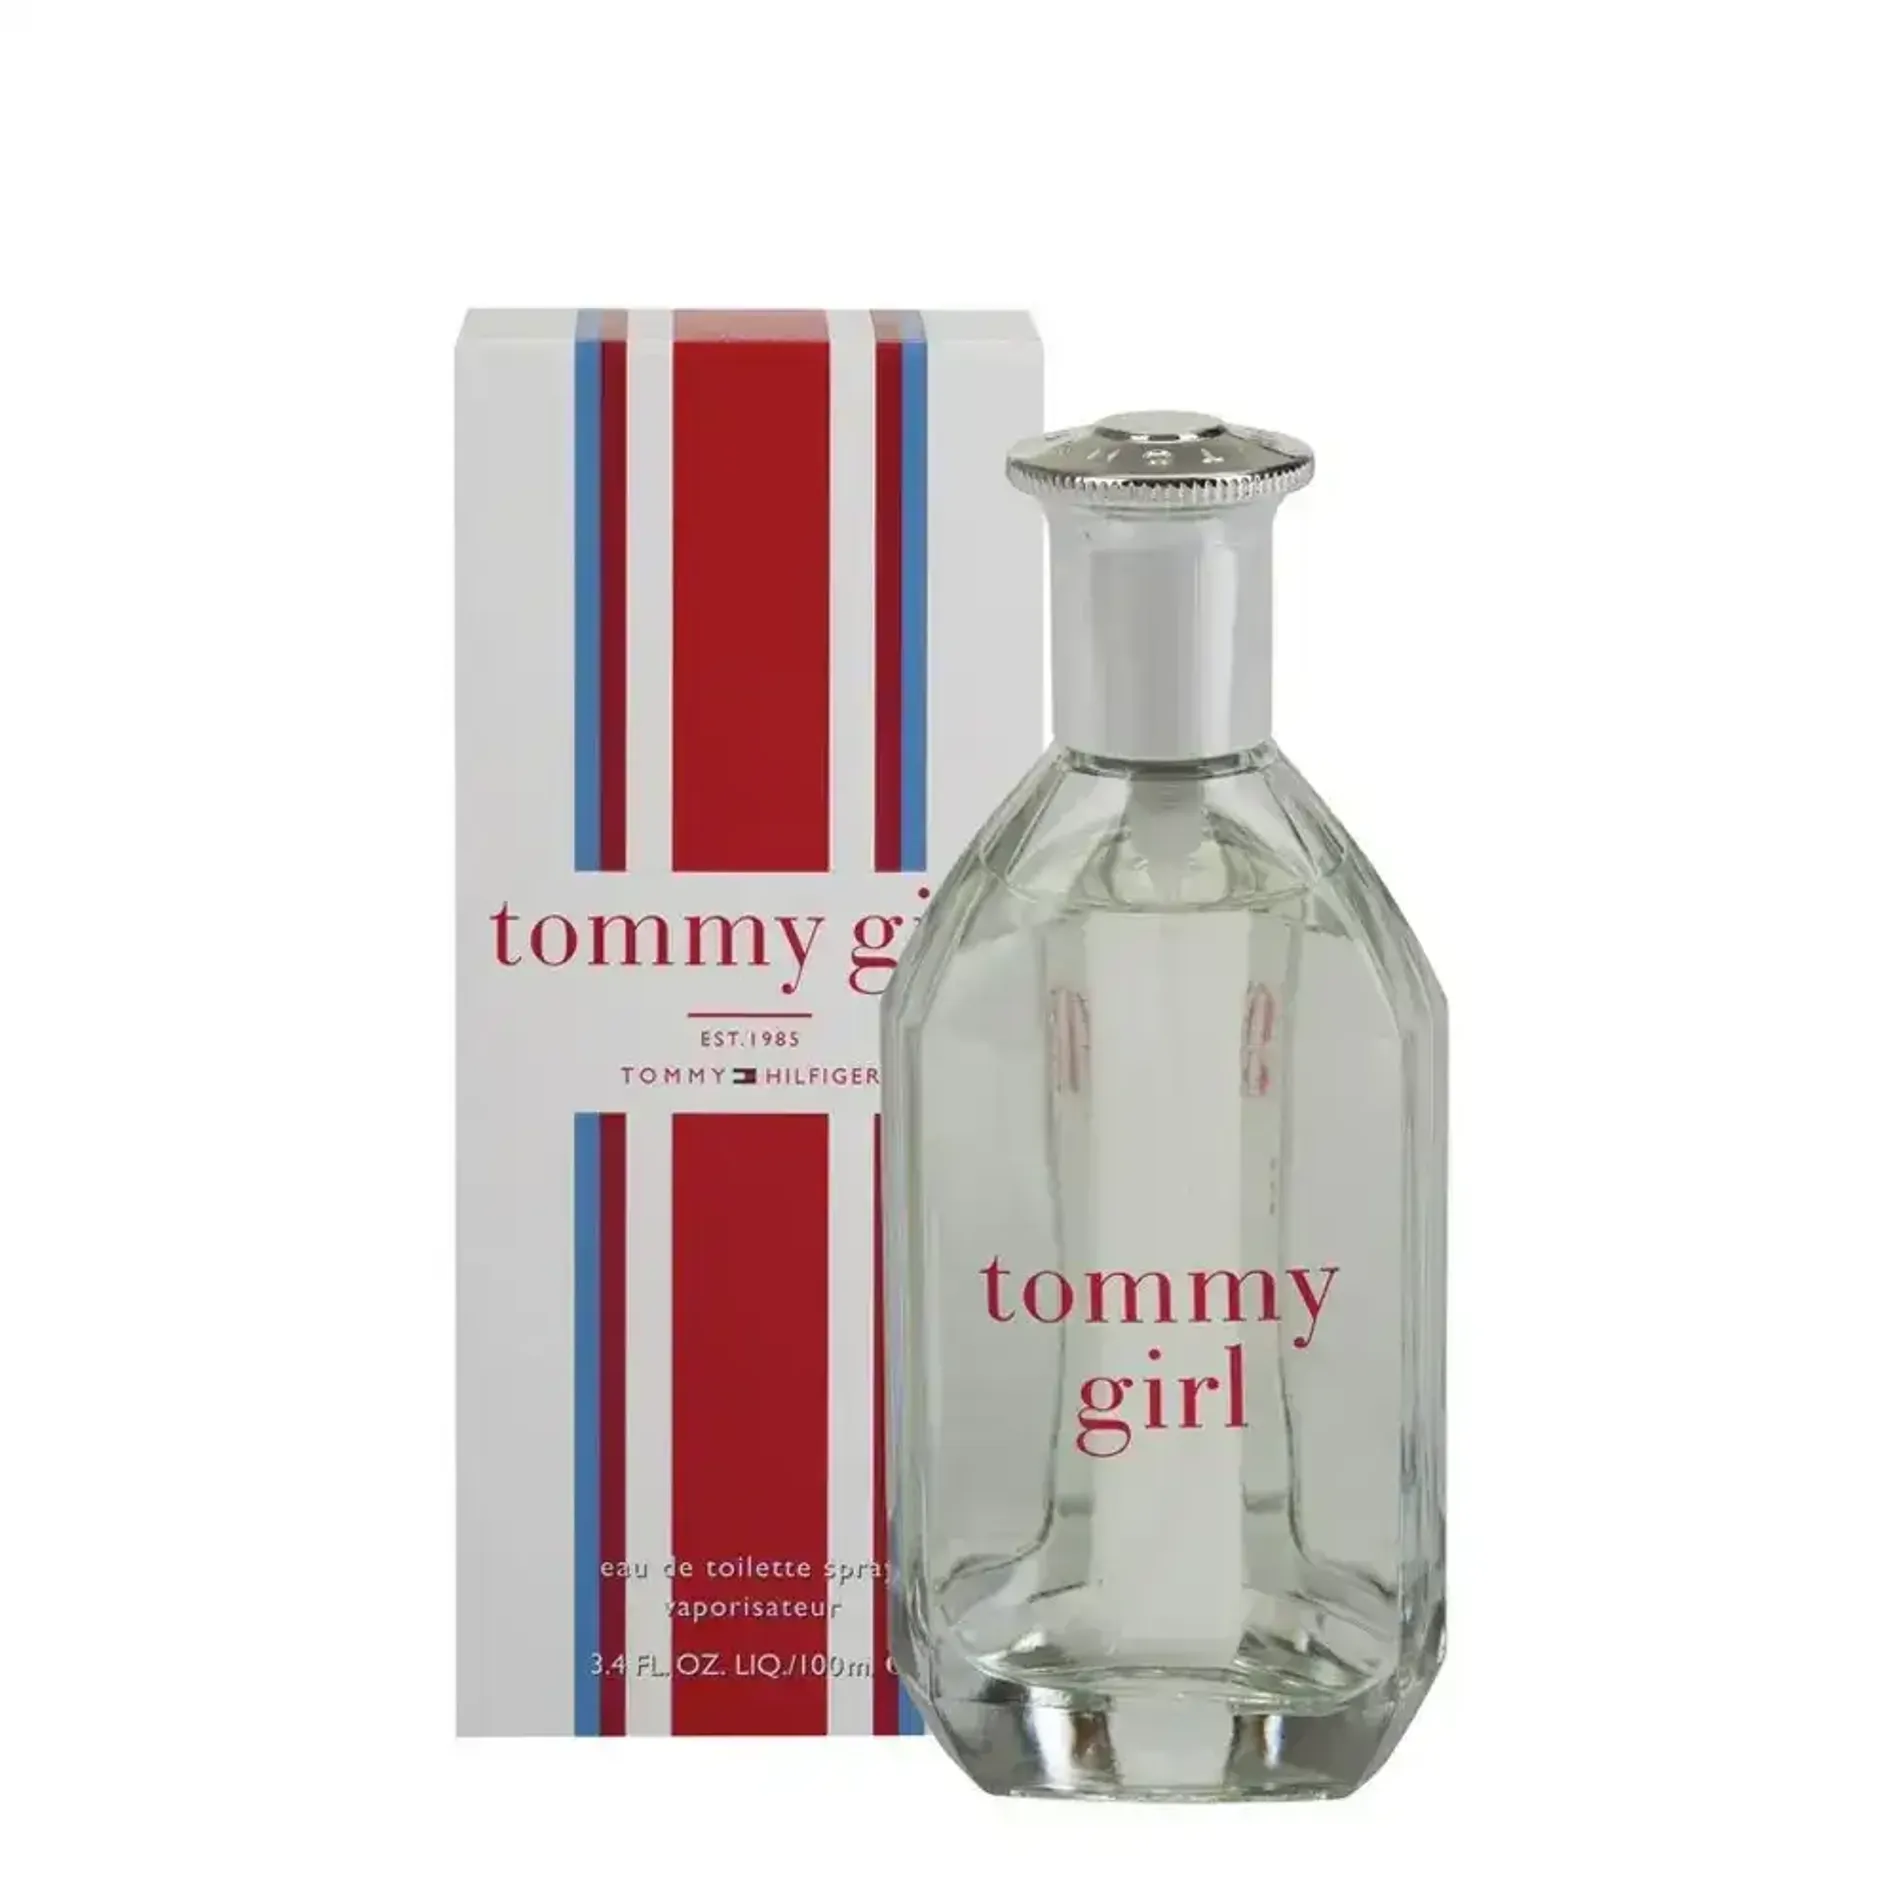 nuoc-hoa-danh-cho-nu-tommy-girl-cologne-spray-edt-50ml-100ml-4